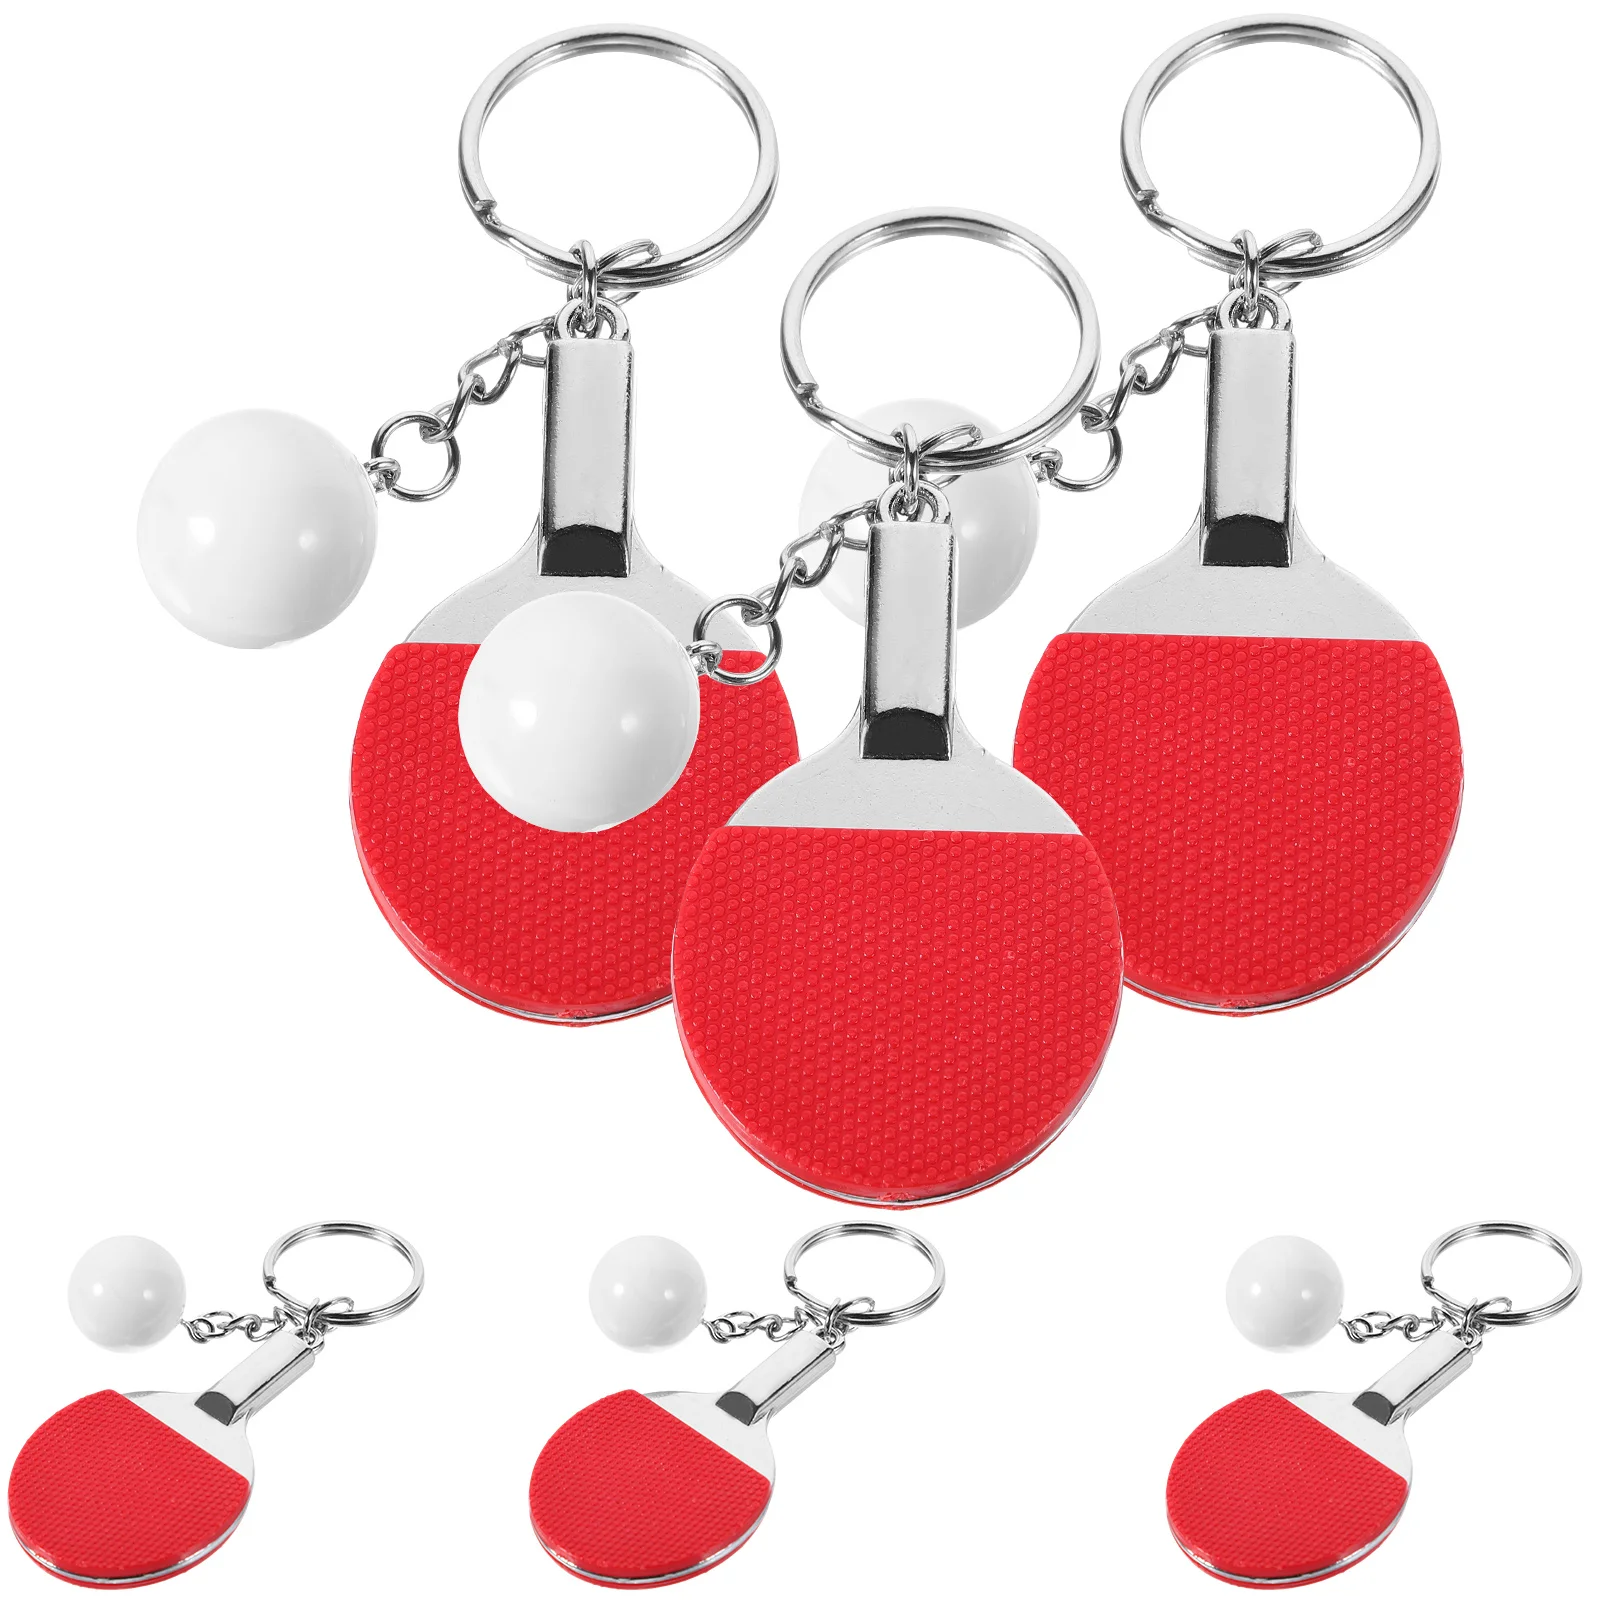 Table Tennis Ball Keychain Bag Pendant Gift Sporting Goods Simulated Racket (red) 6pcs